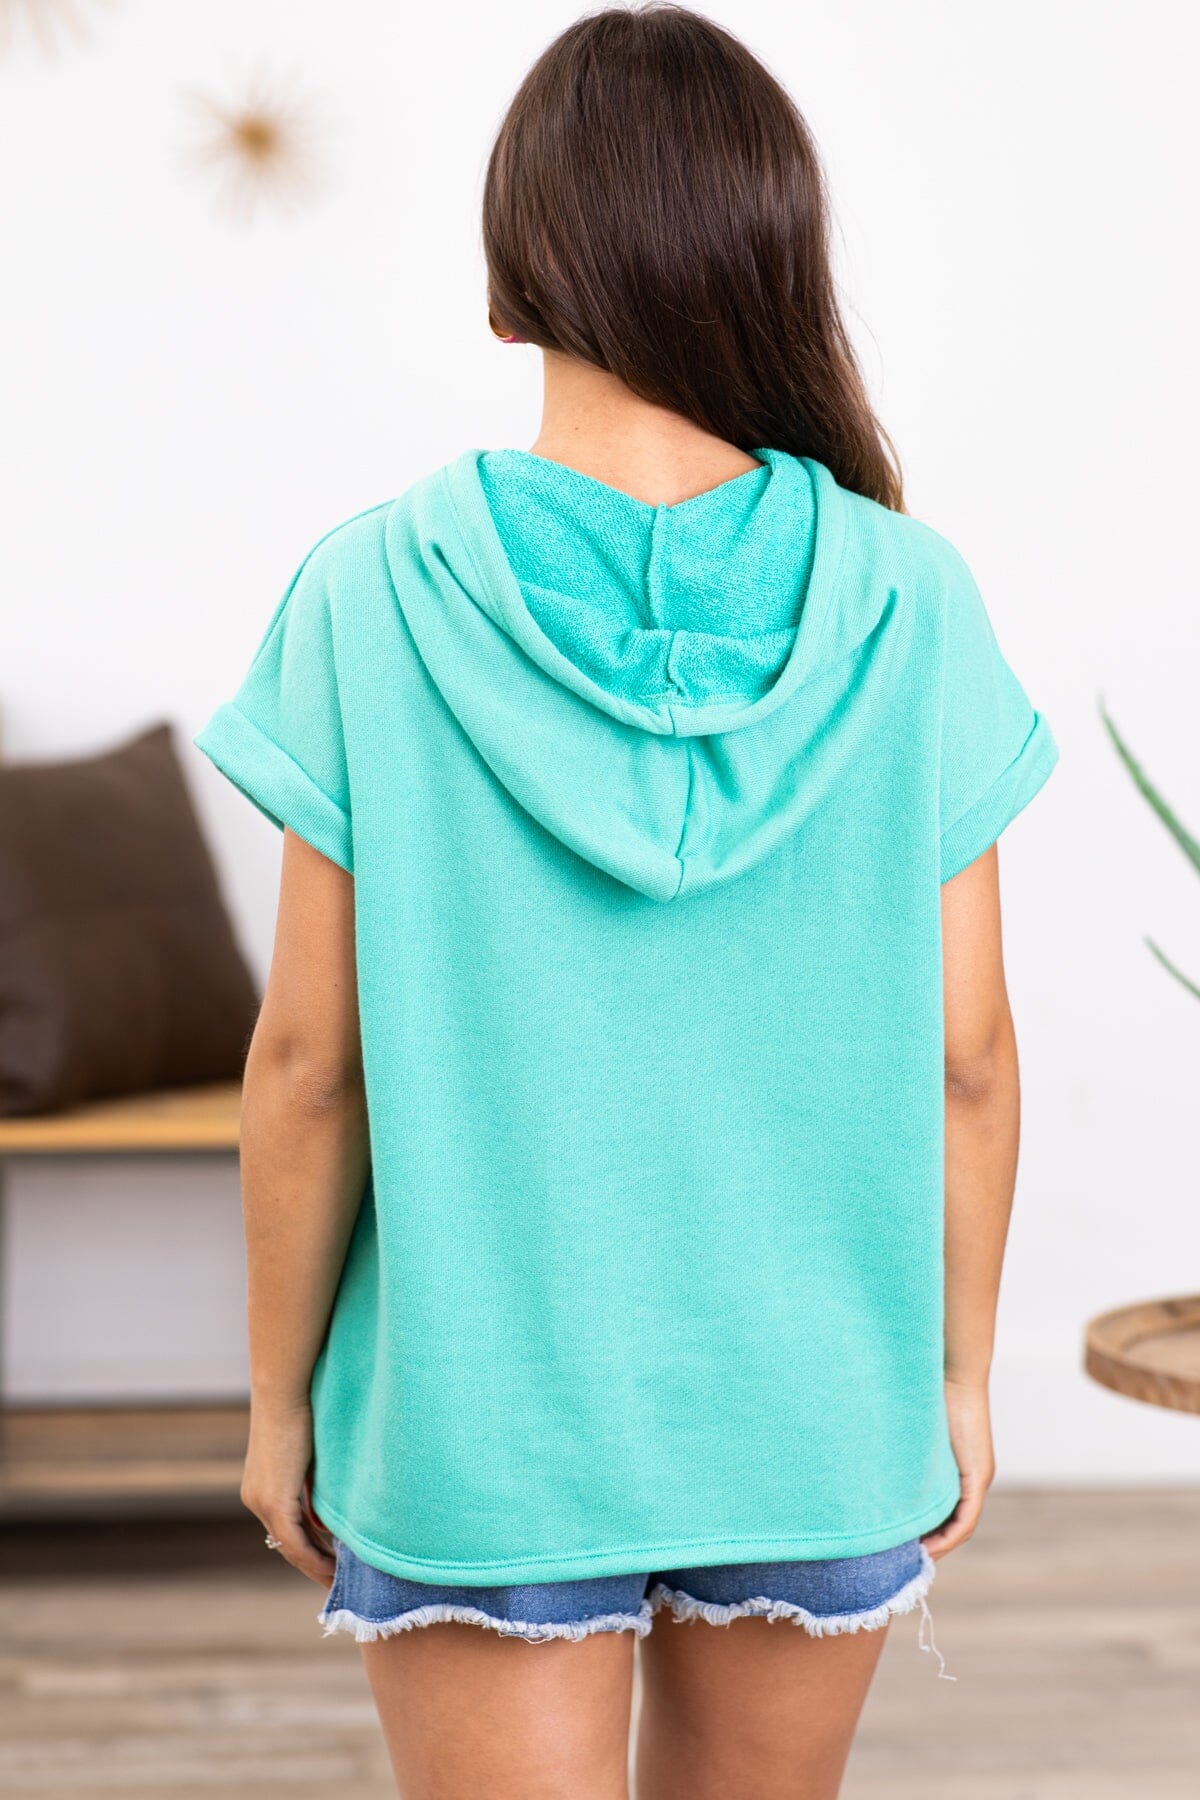 Turquoise Short Sleeve Hooded Top - Filly Flair